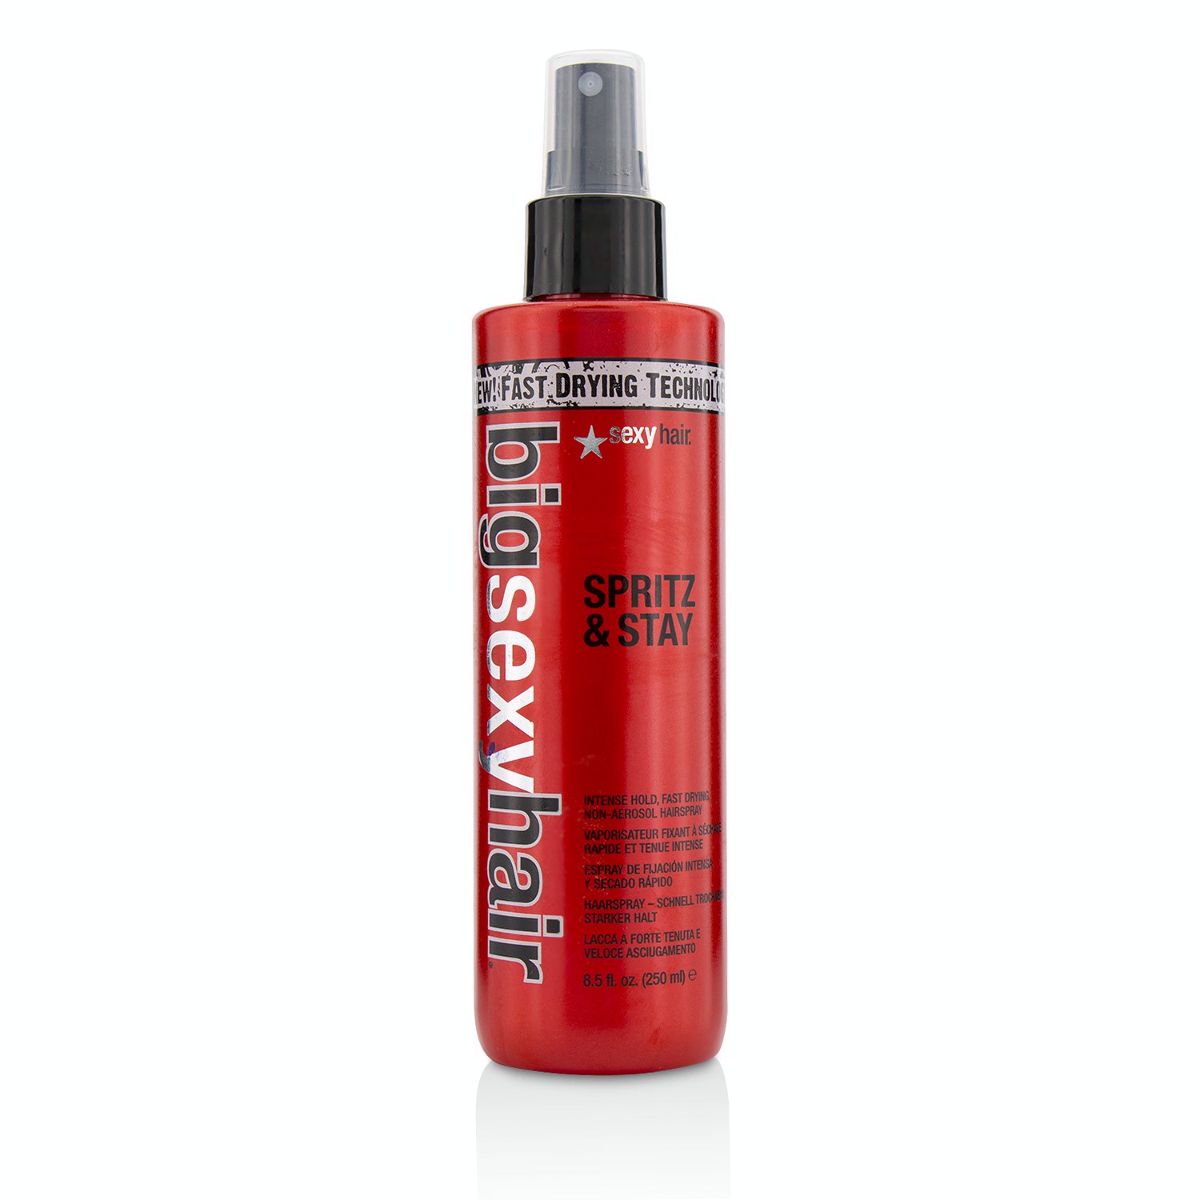 Big Sexy Hair Spritz  Stay Intense Hold Fast Drying Non-Aerosol Hairspray Sexy Hair Concepts Image